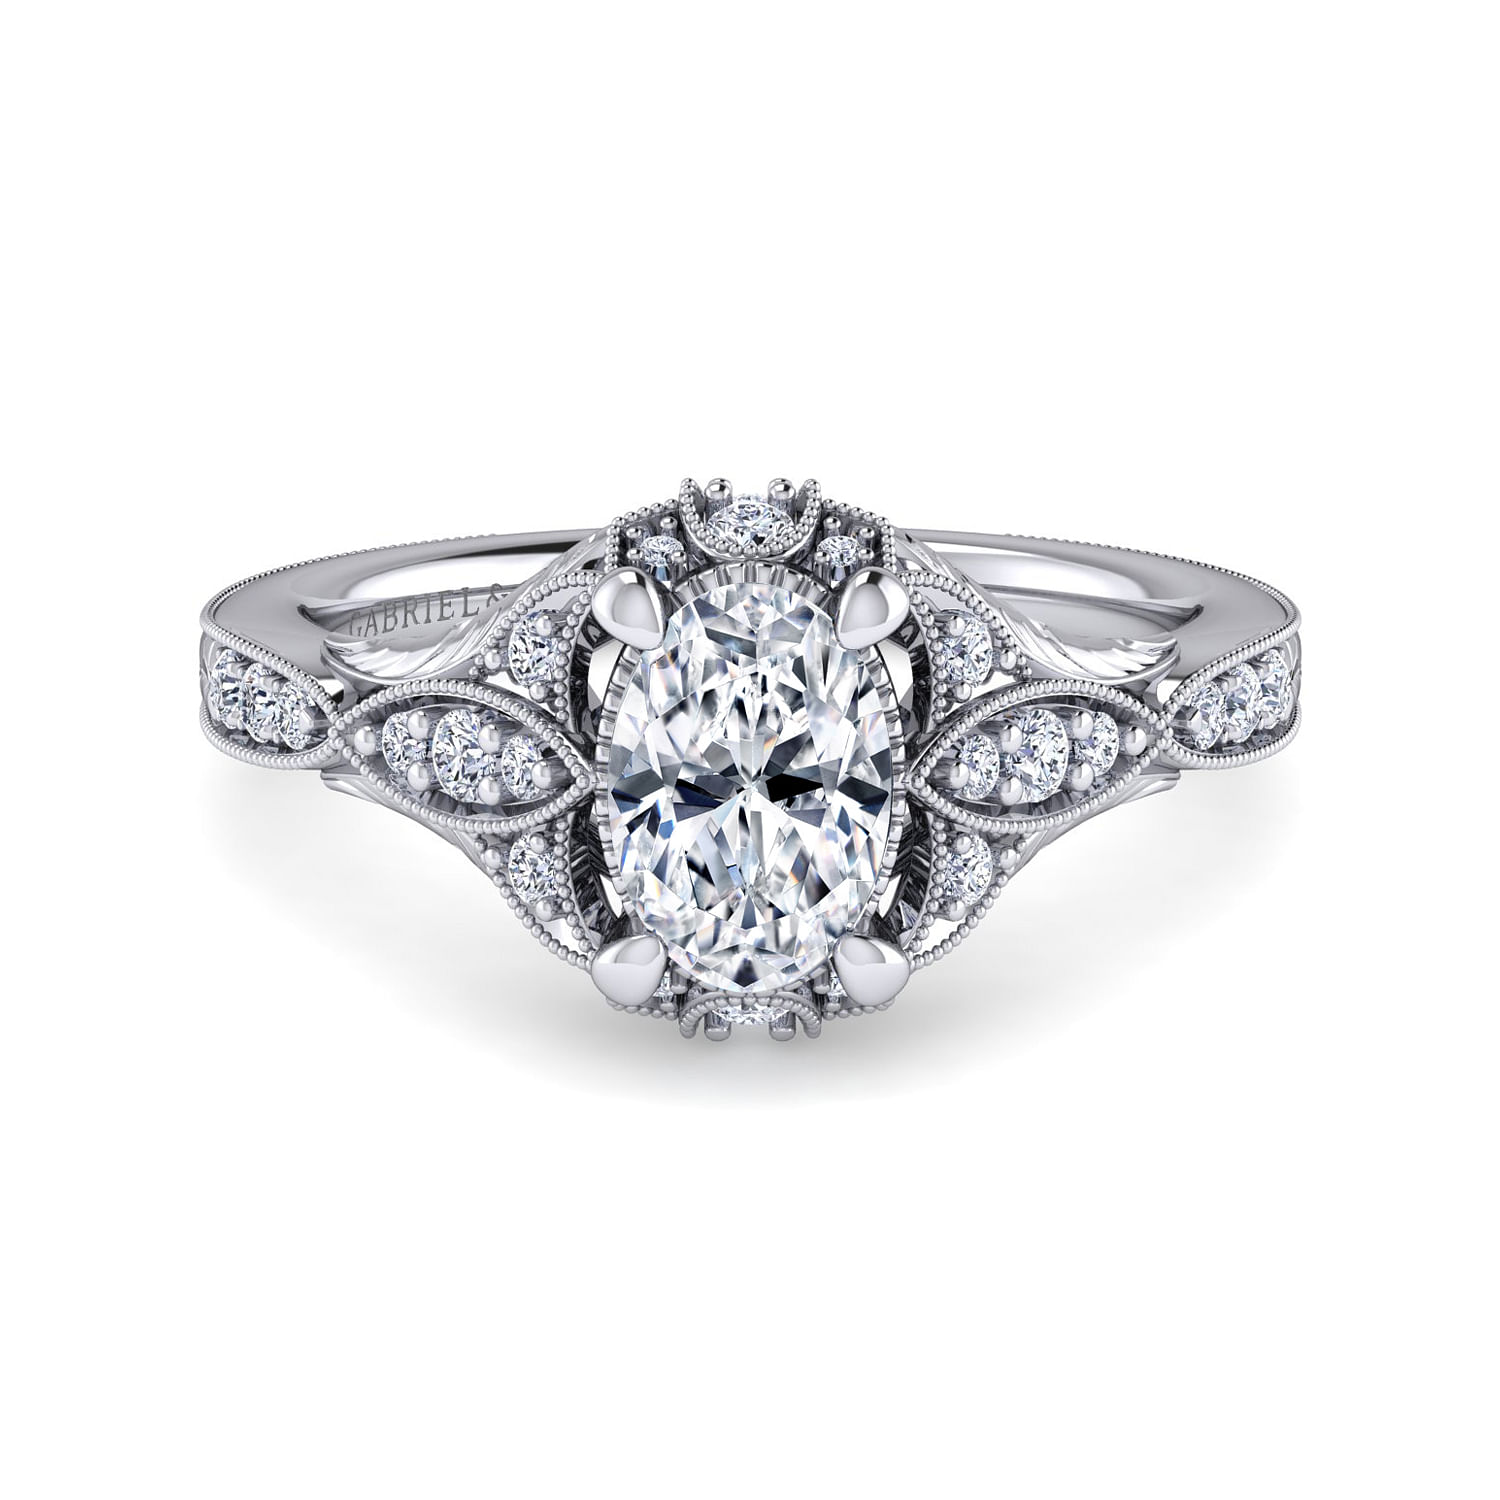 Gabriel - Unique 14K White Gold Vintage Inspired Oval Halo Diamond Engagement Ring